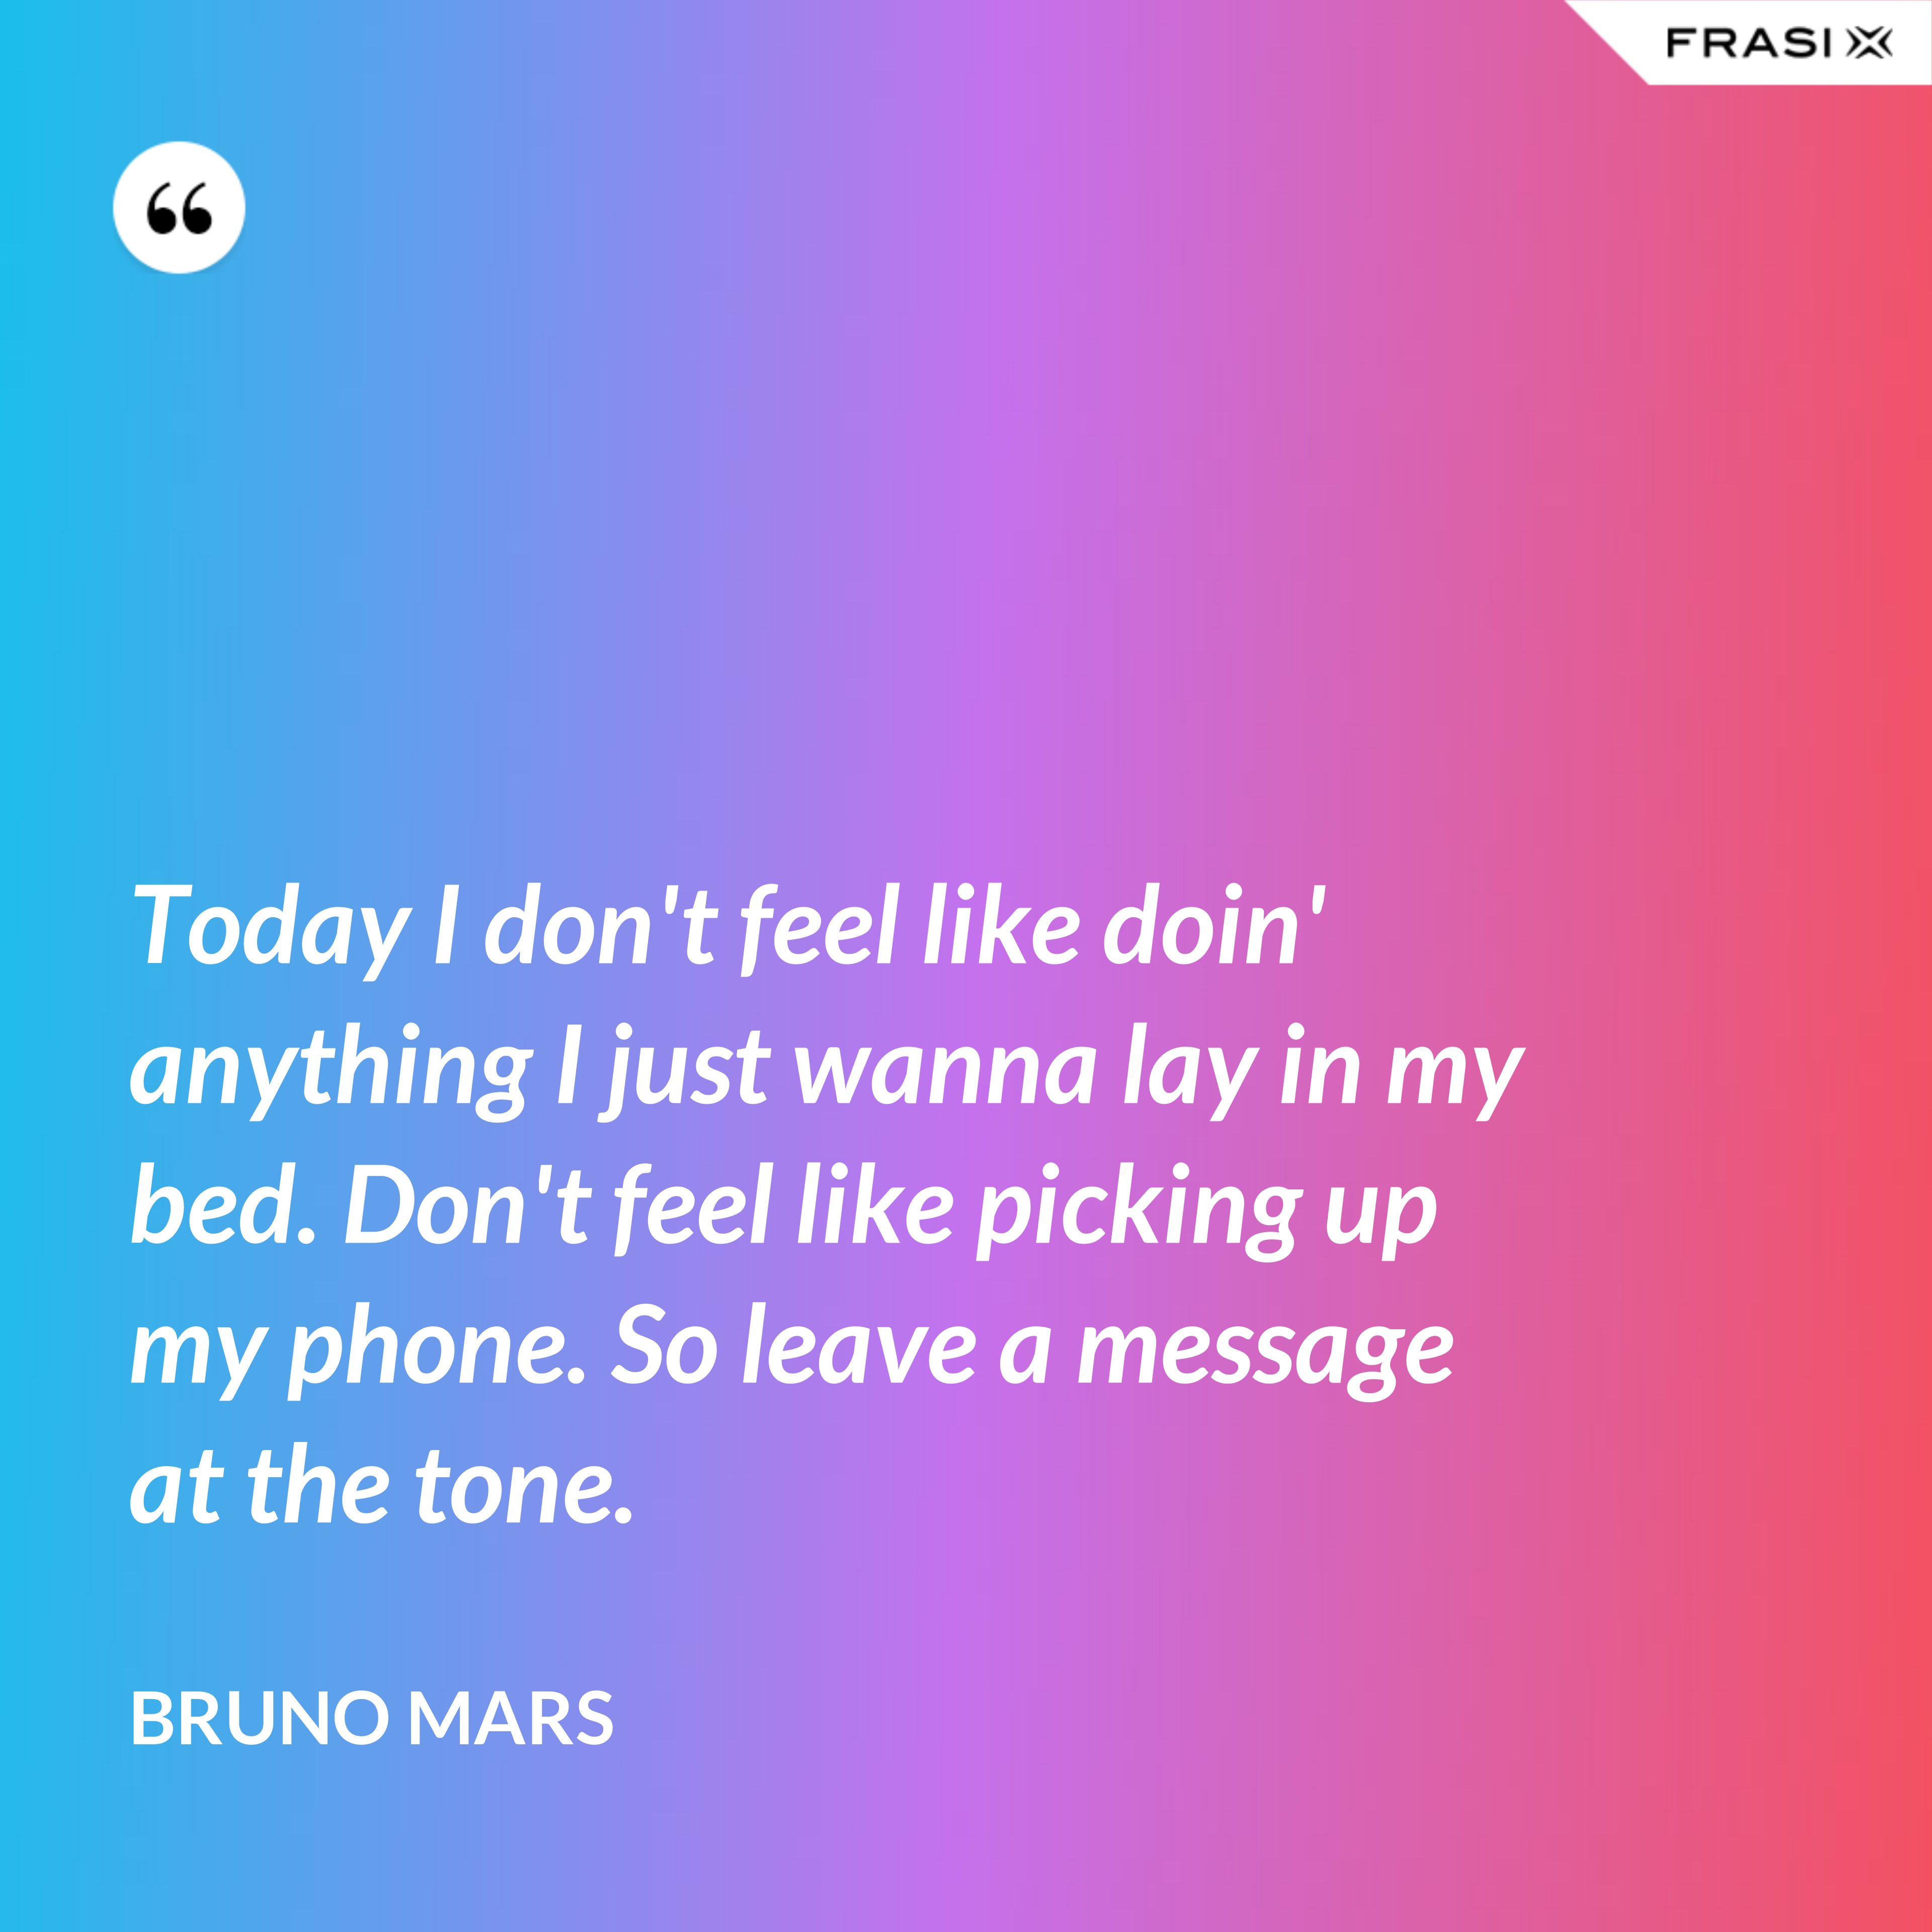 Today I don't feel like doin' anything I just wanna lay in my bed. Don't feel like picking up my phone. So leave a message at the tone. - Bruno Mars